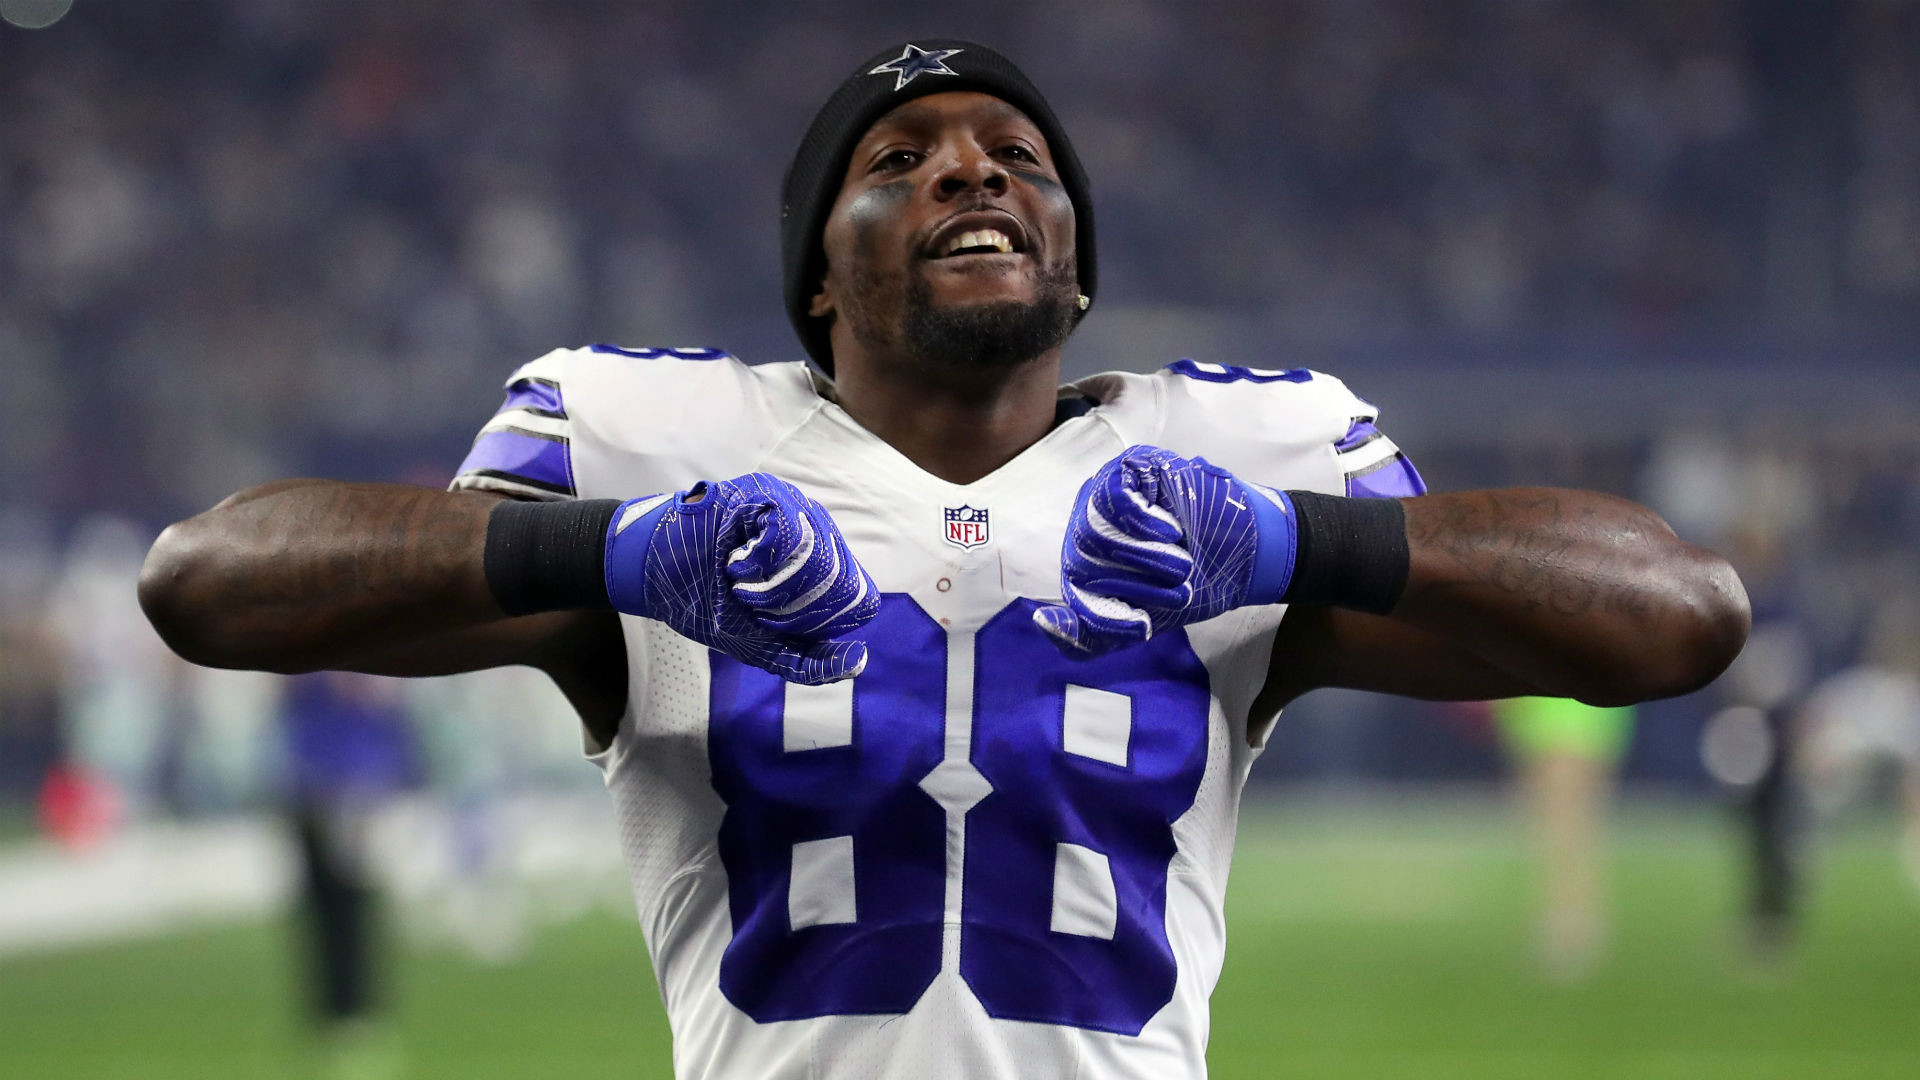 1920x1080 Cowboys' Dez Bryant won't be going to this Blaze Pizza again | NFL |  Sporting News